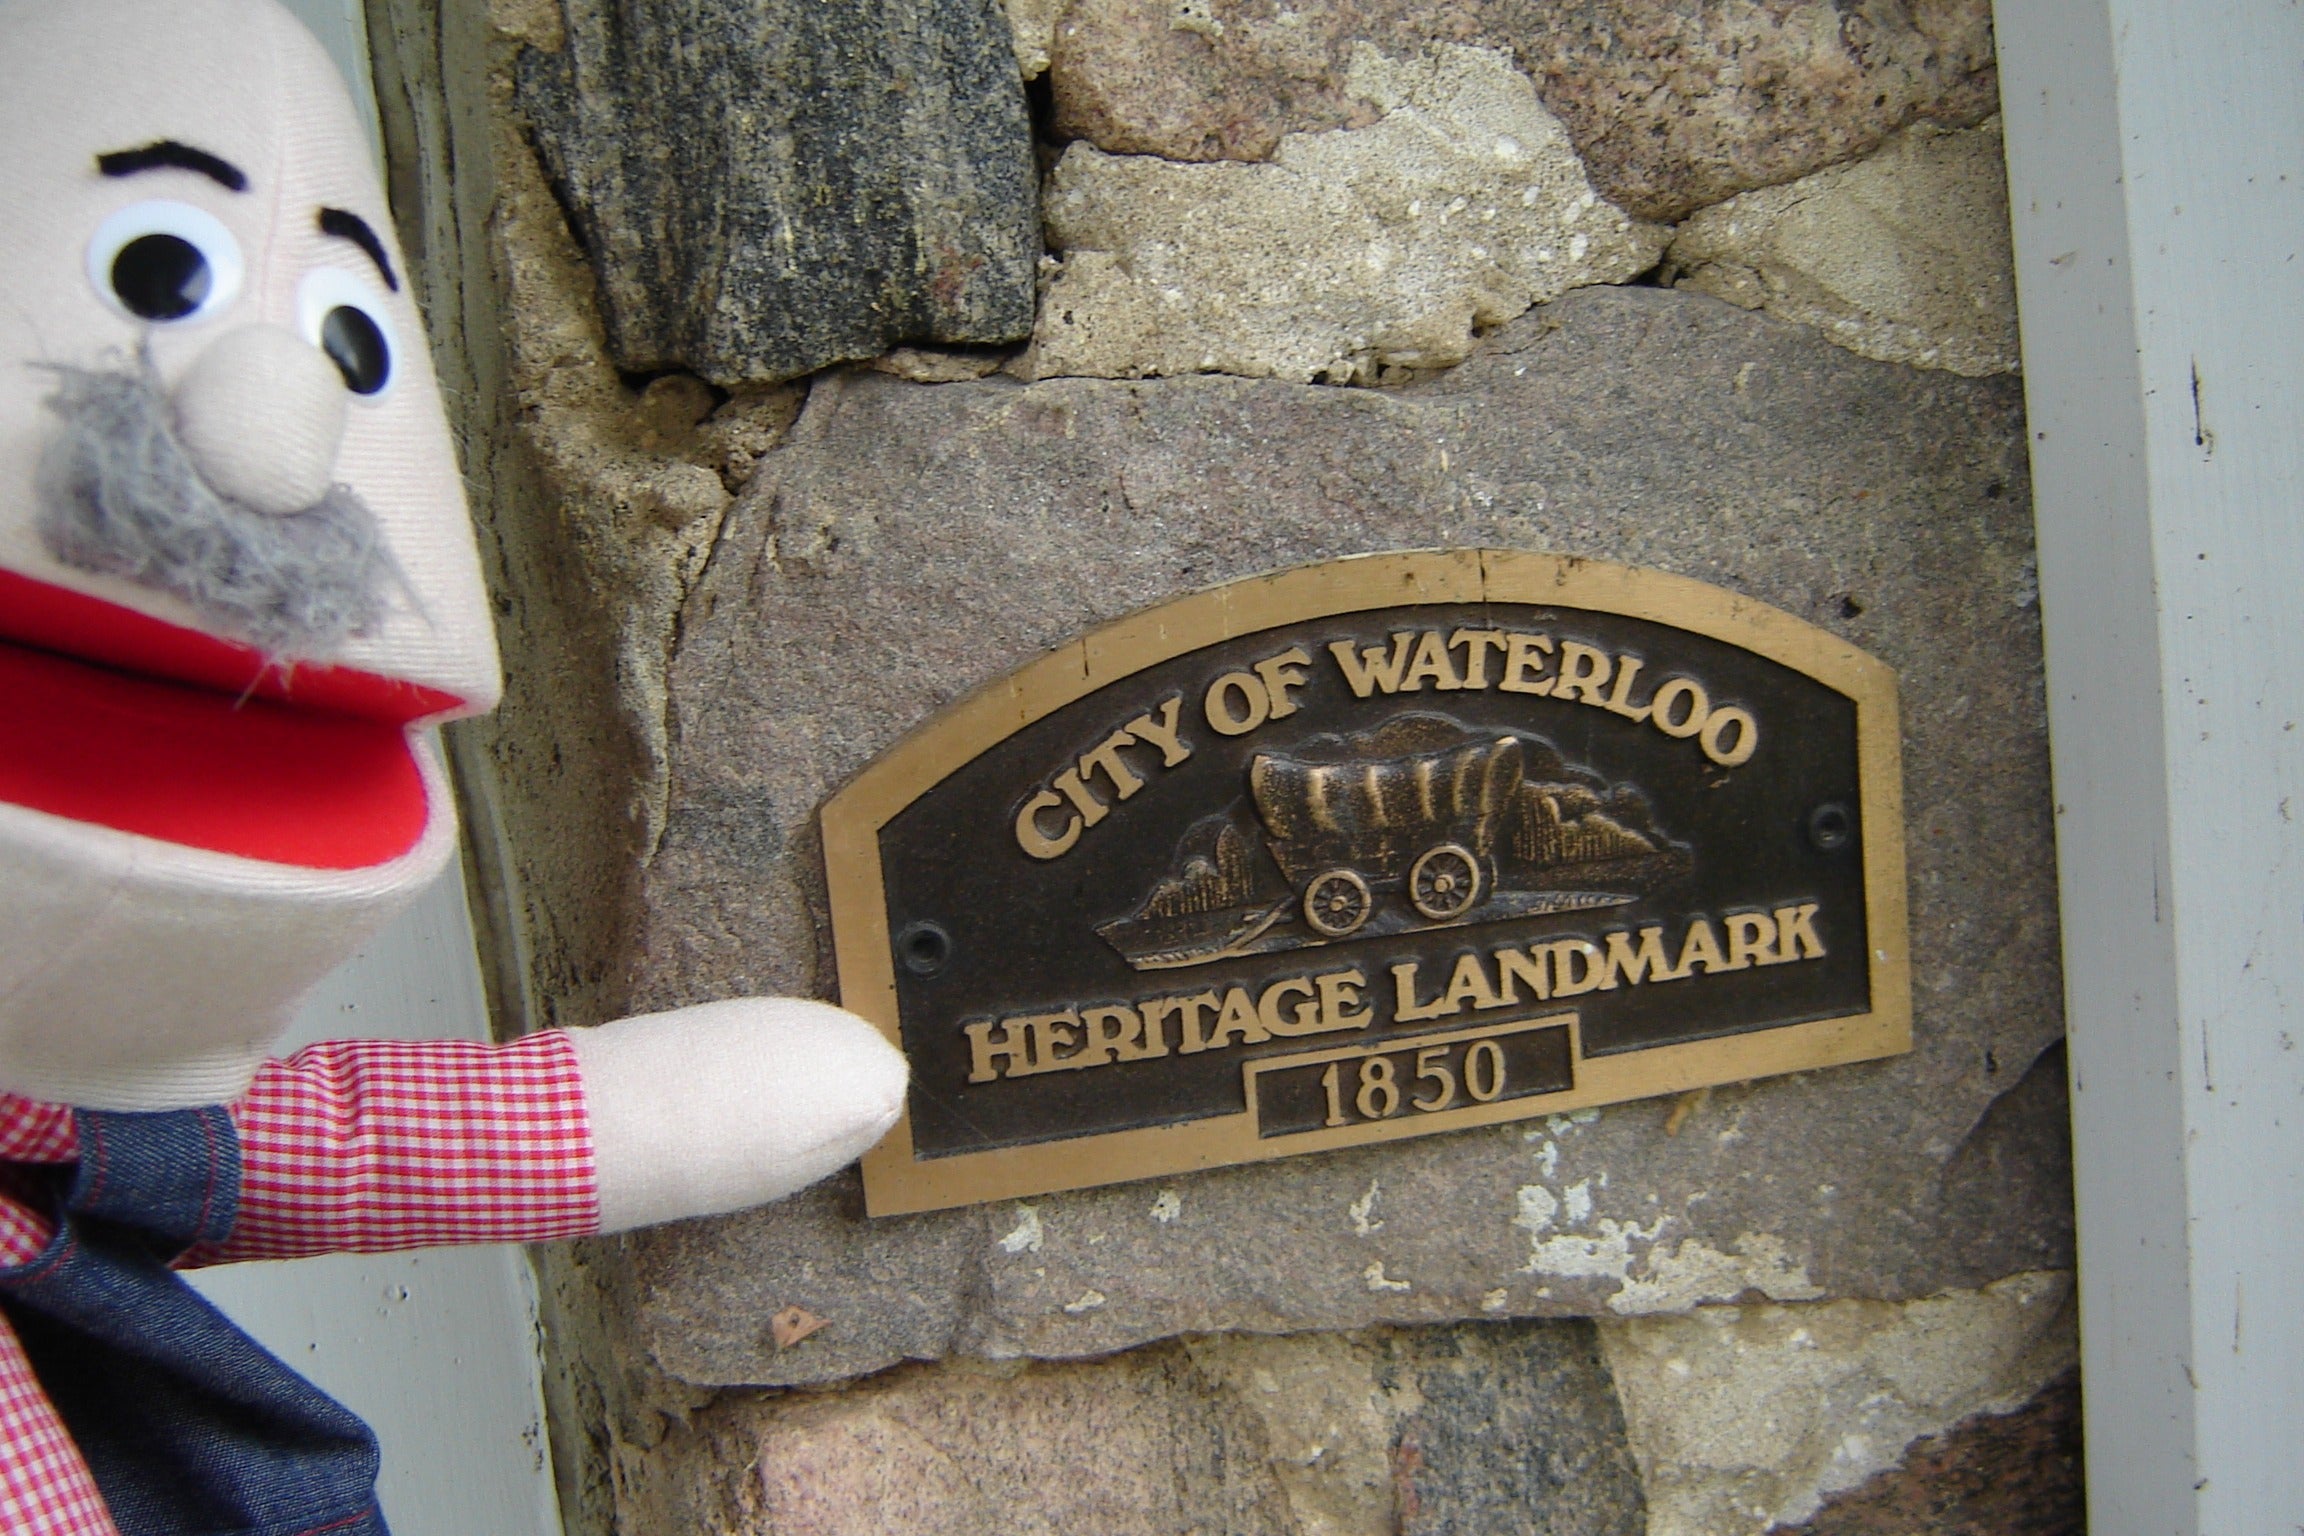 A hand puppet, featuring overalls and a mustache, points to a plaque that reads "City of Waterloo Heritage Landmark, 1850"